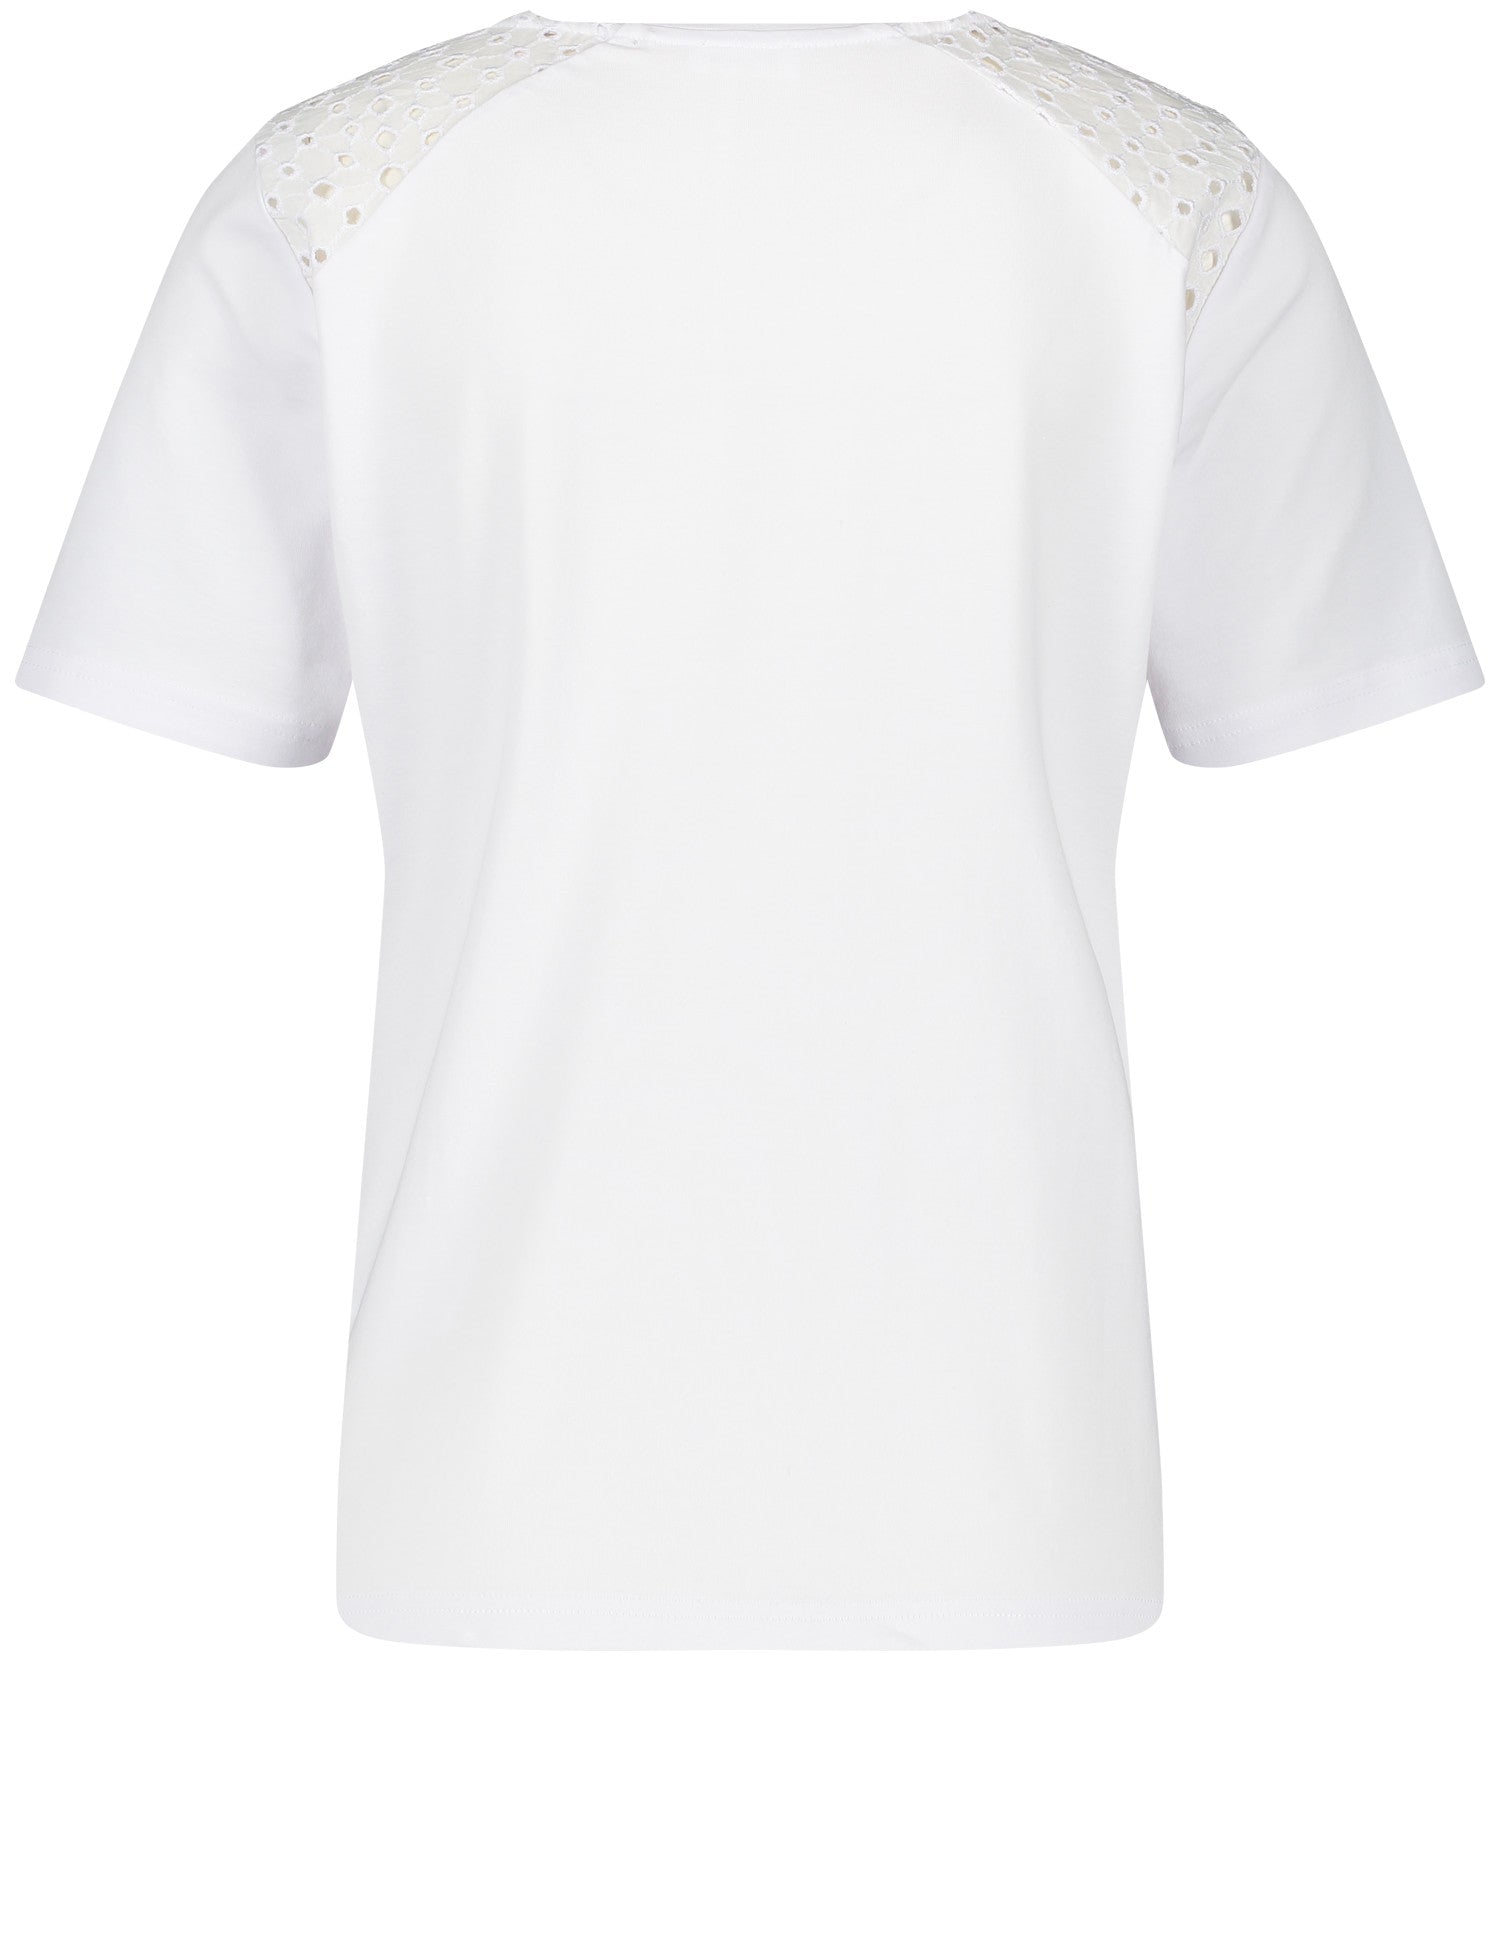 Gerry Weber White Tee with Lace Shoulder